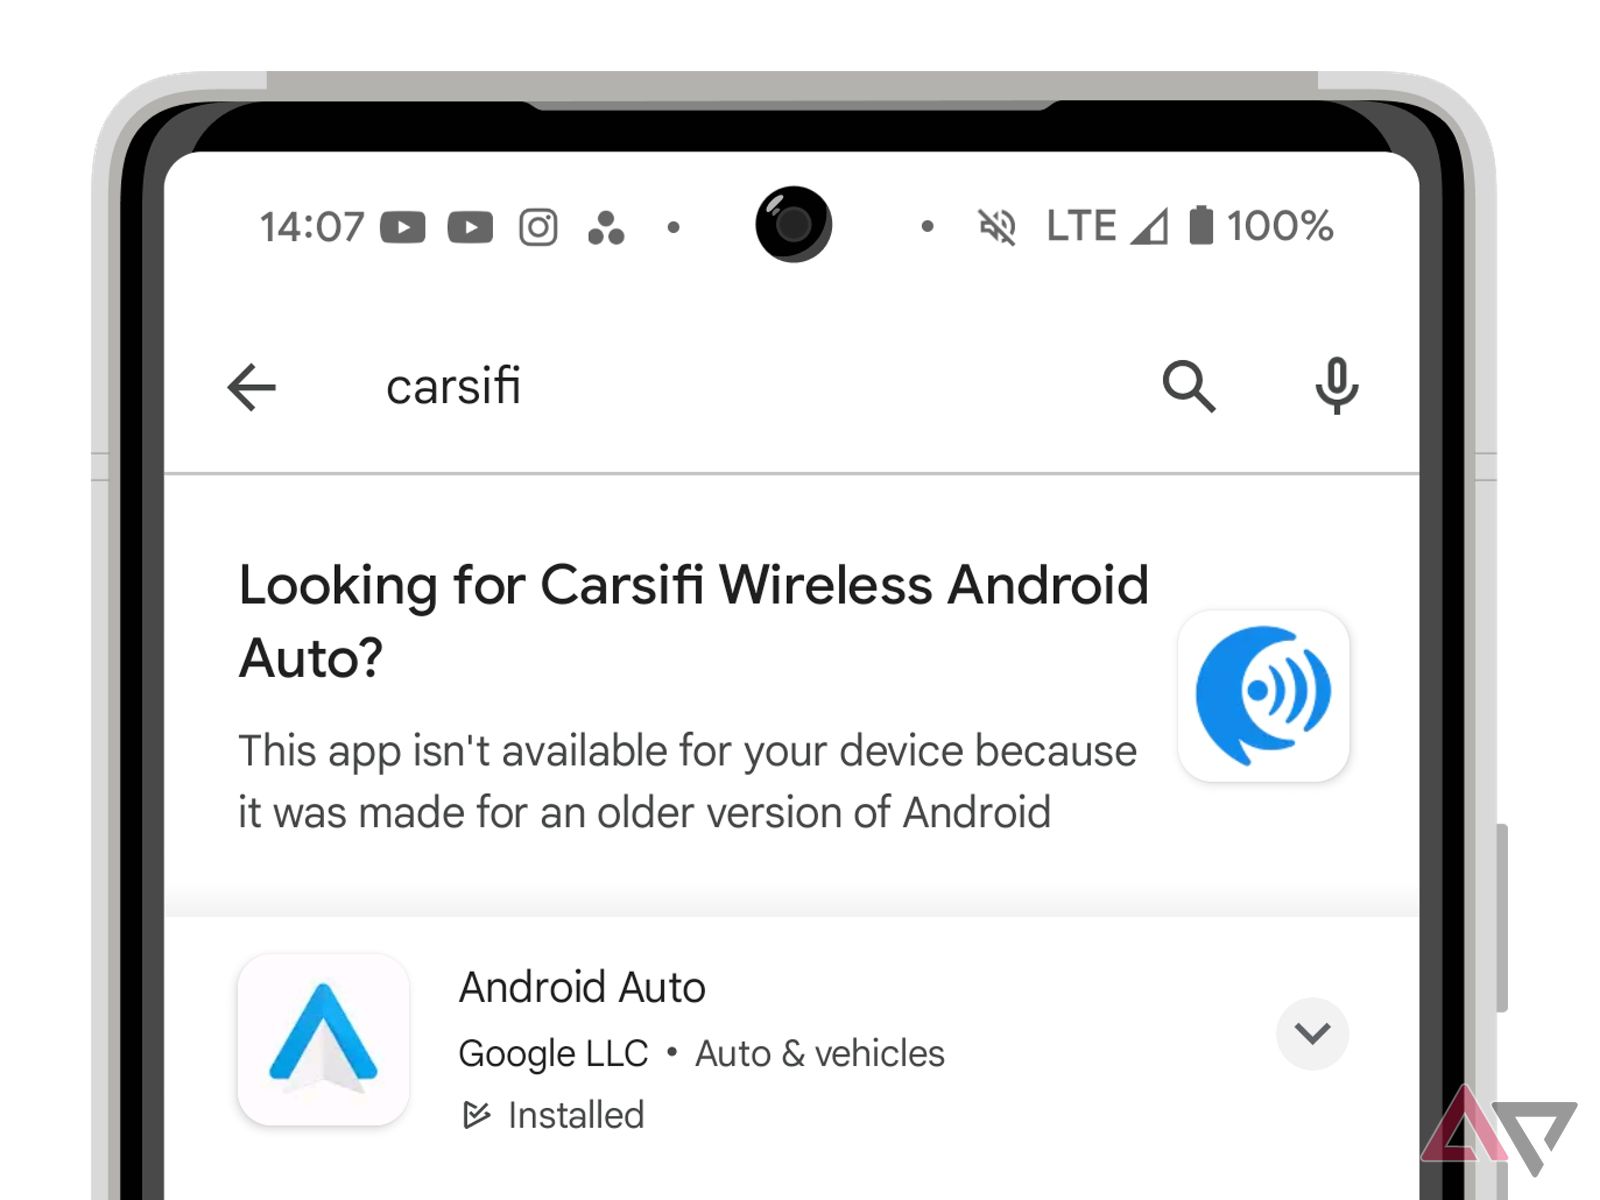 Google Play Store showing Carsifi Wireless Android Auto app unavailable.